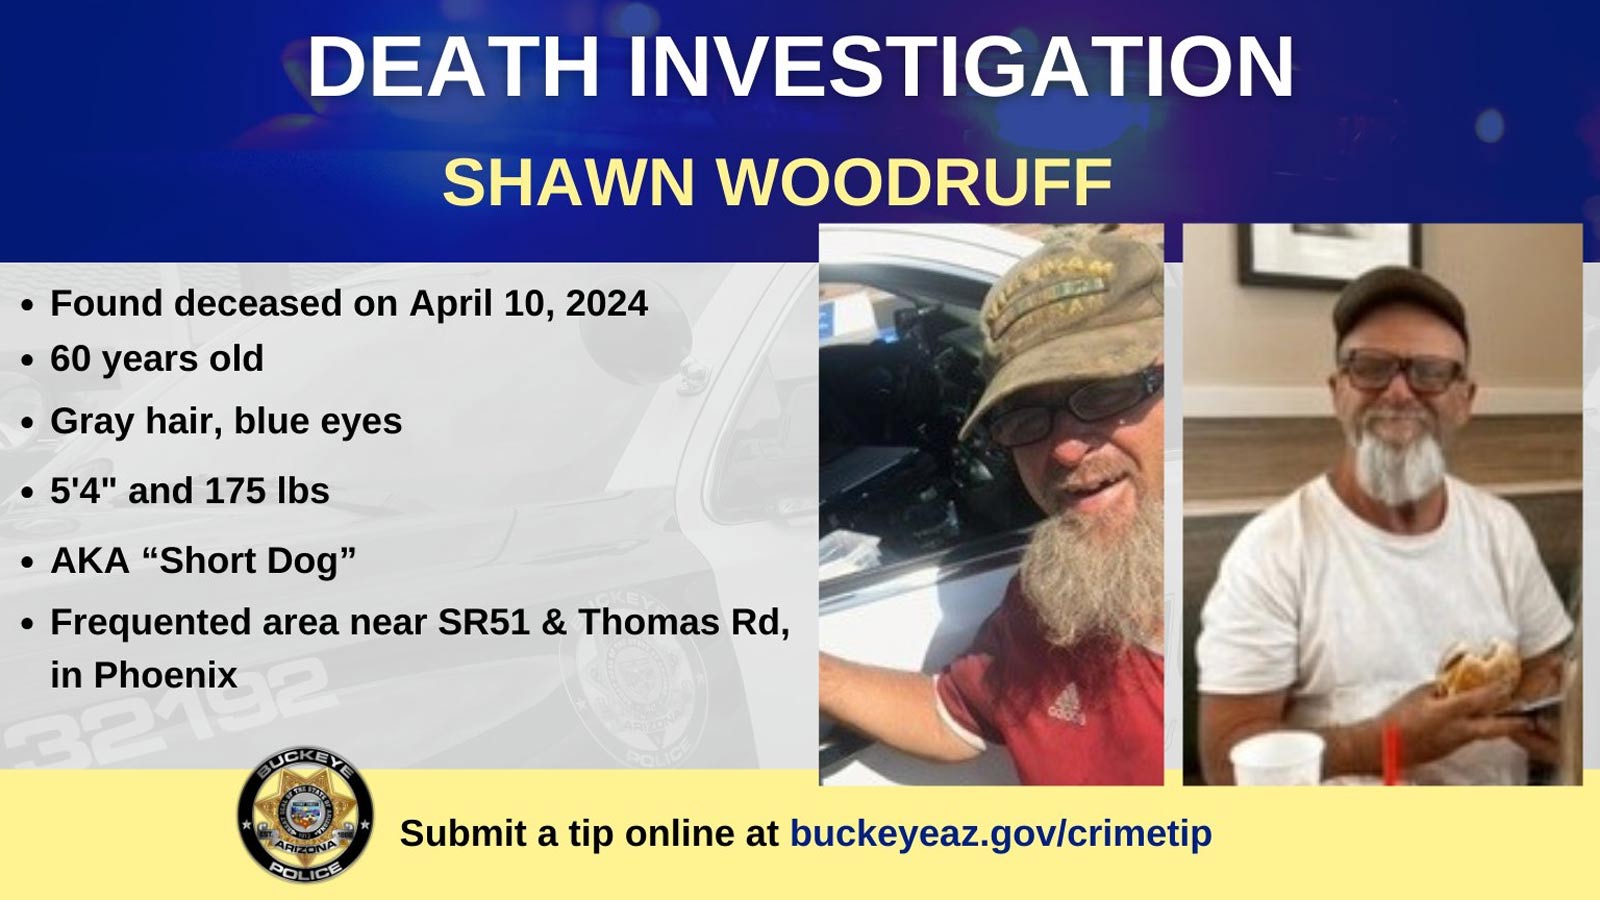 A graphic with photos and a description of Shawn Woodruff, whose body was found dead in a Buckeye landfill on April 10, 2024.